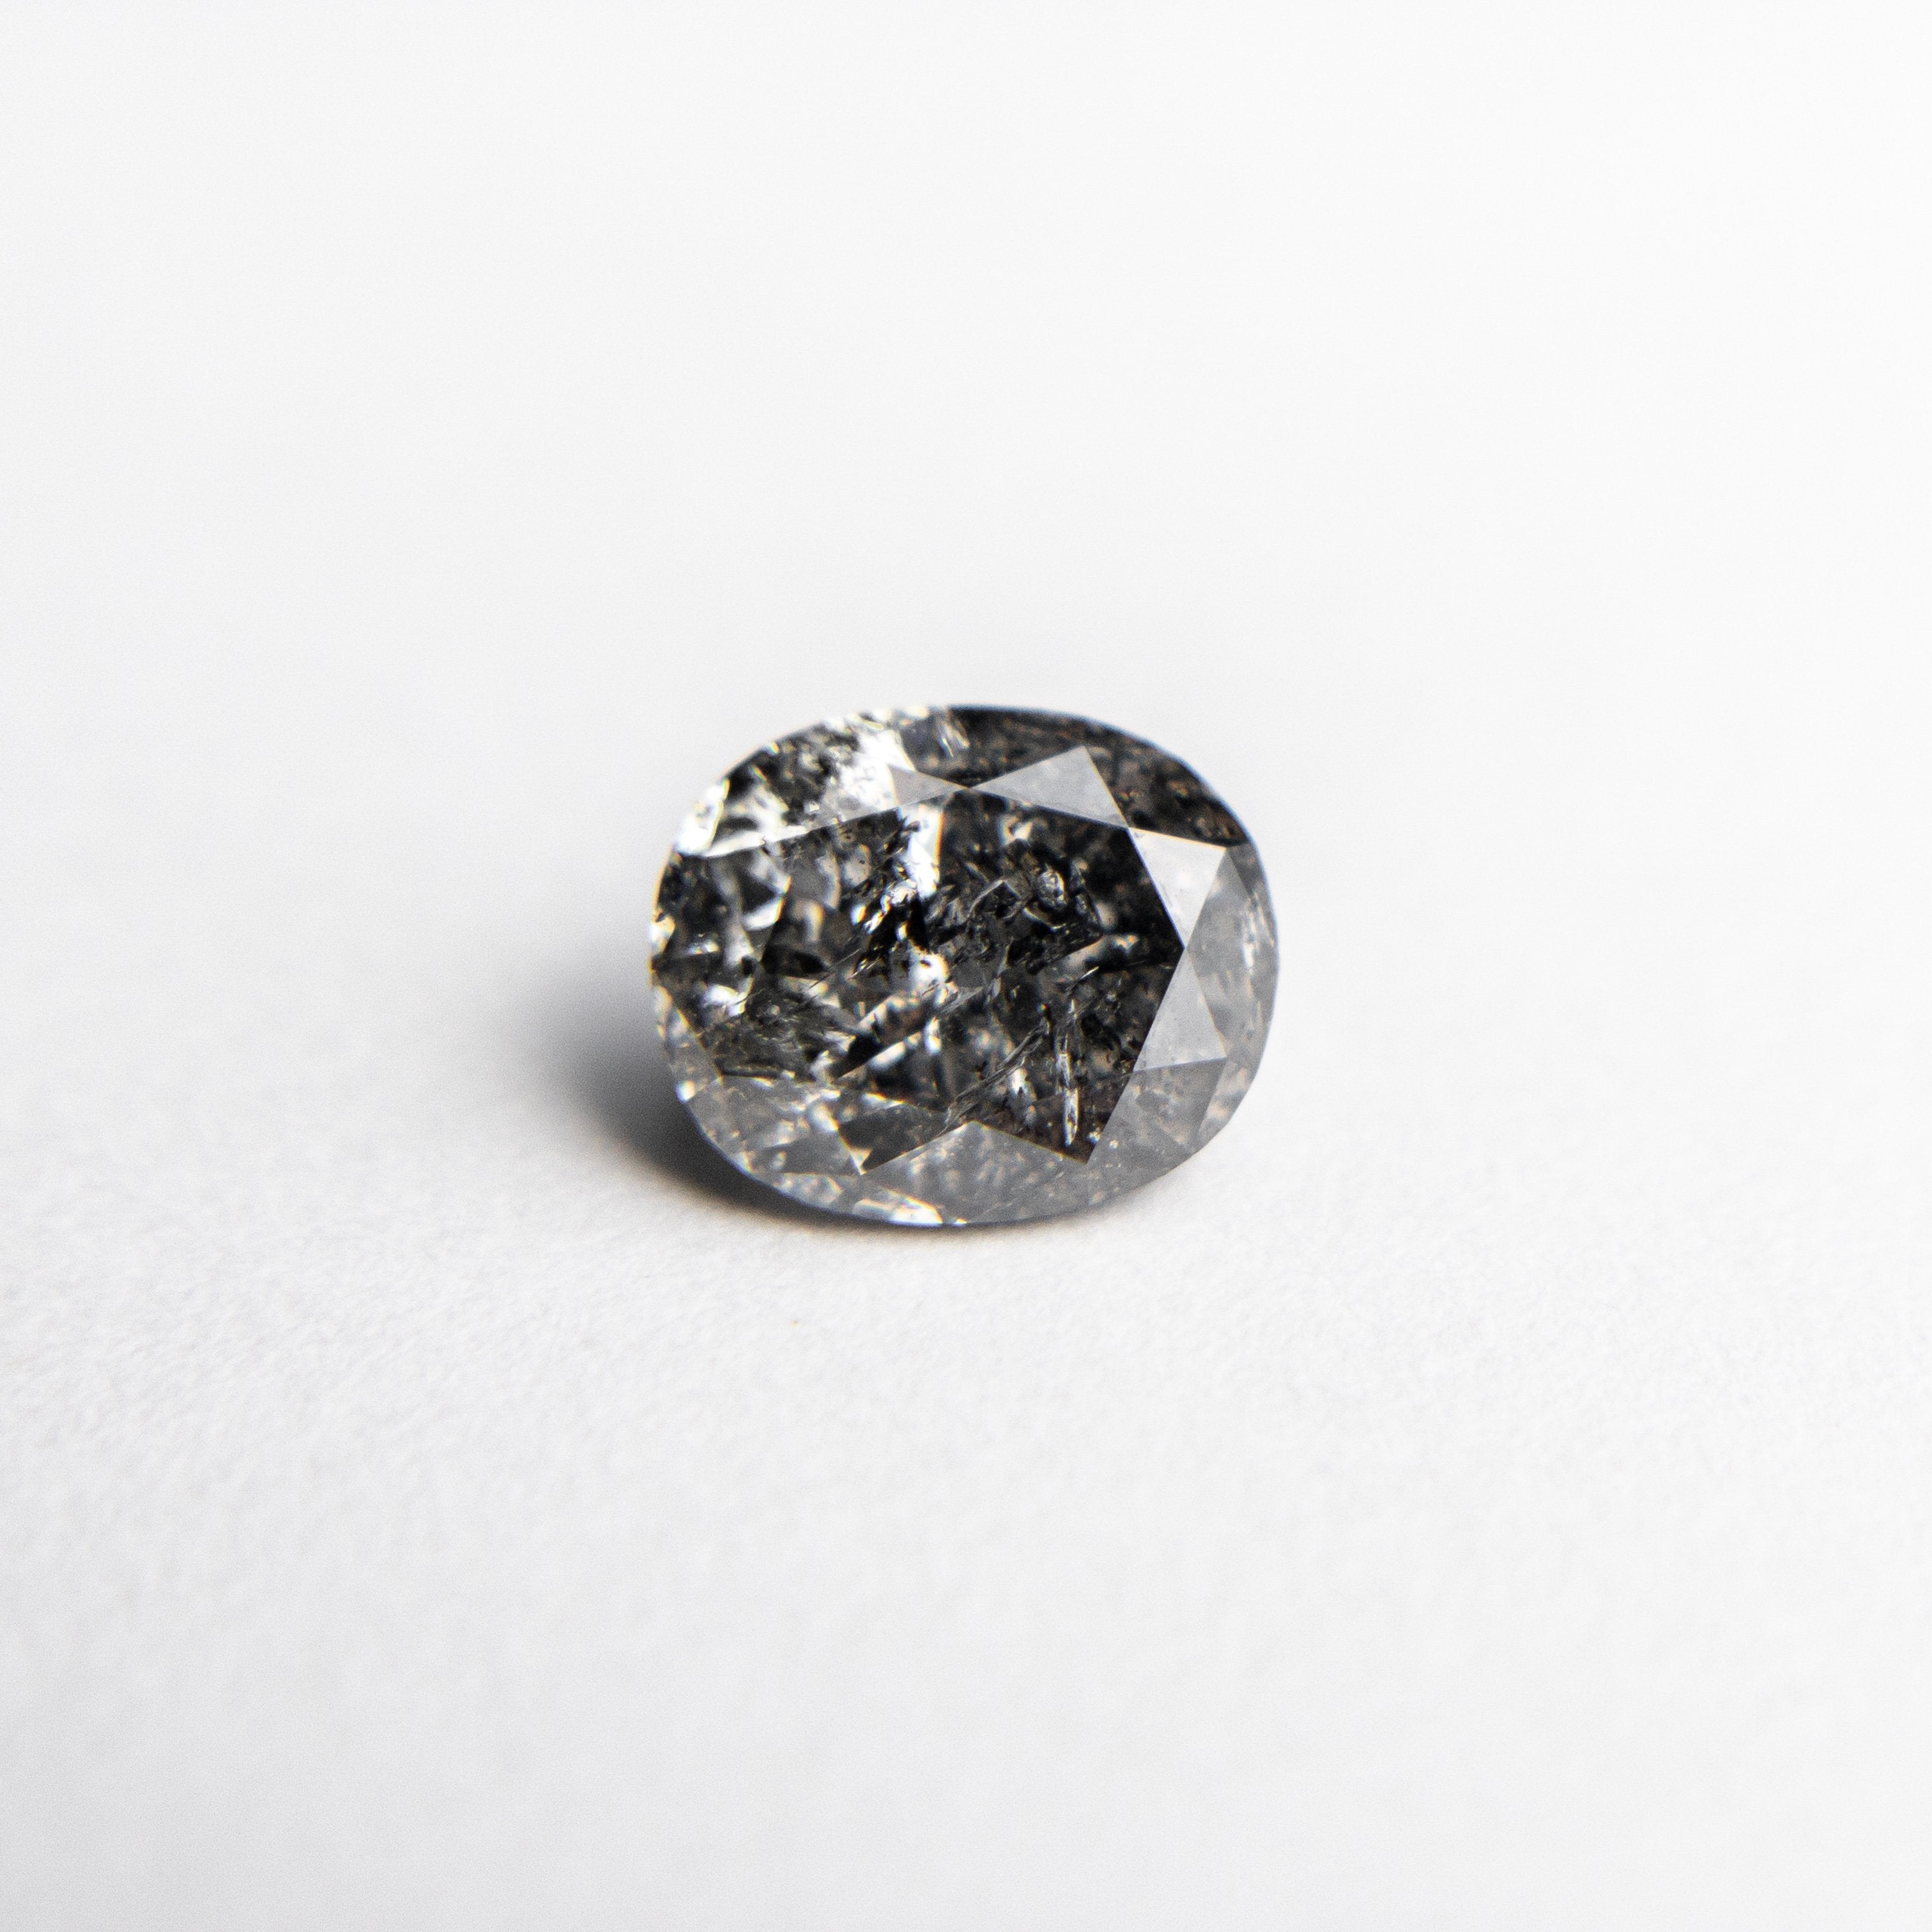 0.72ct 6.04x5.06x3.27mm Oval Brilliant 18453-08 hold D1905